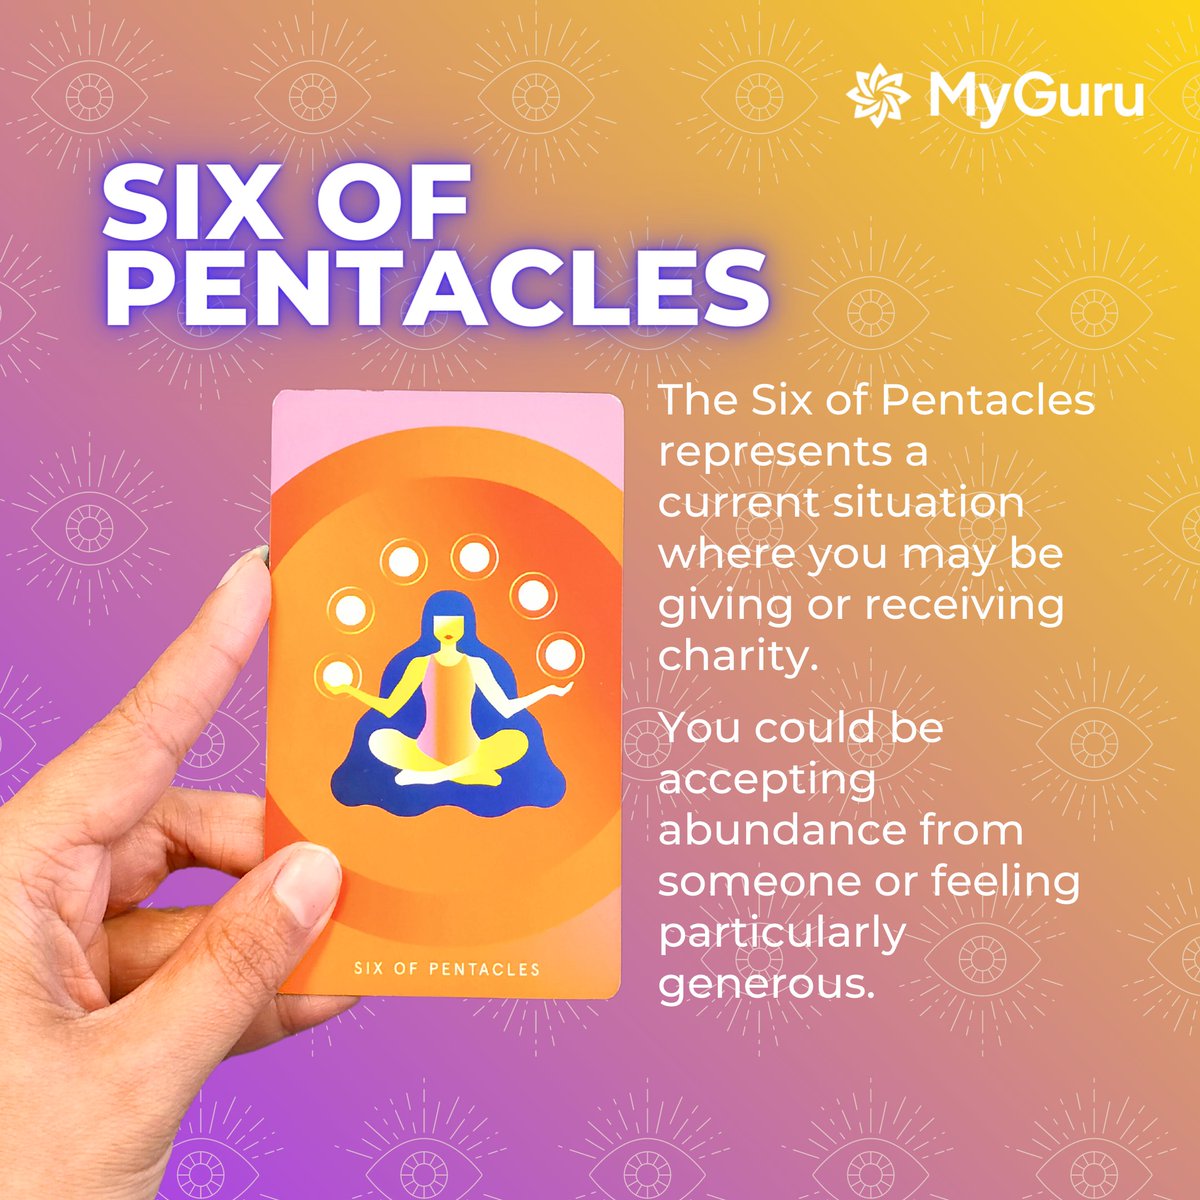 💜 We've pulled two cards for you today to help provide you with a clear view. Today's cards are...
The Ten of Cups🍷
The Six of Pentacles⭐️
Do you claim this message?🤲

#foryou #foryoupage #fyp #tarotreadings #tarottuesdays #tarotonline #tarottuesday #tenofcups #sixofpentacles